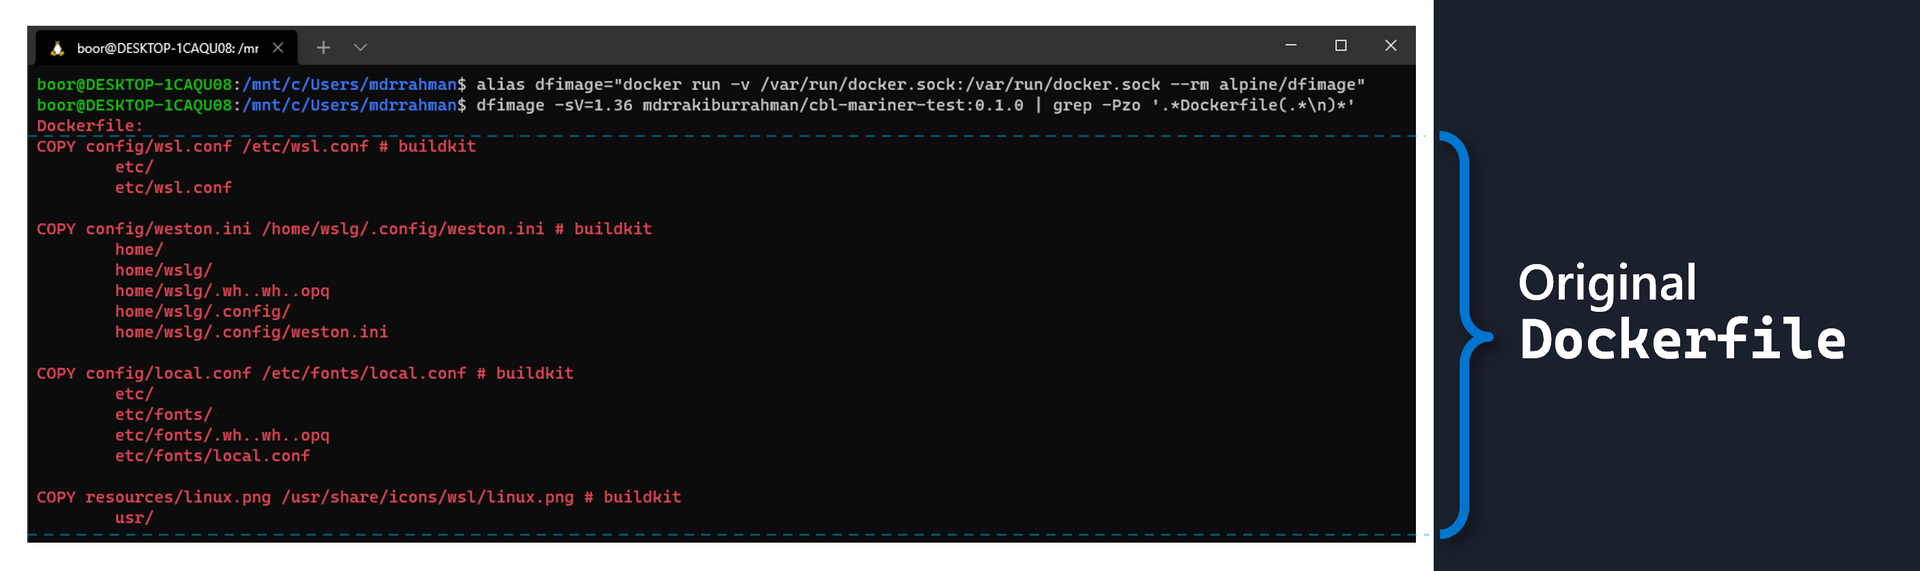 Getting the Dockerfile out of our Mariner Image without access to repo